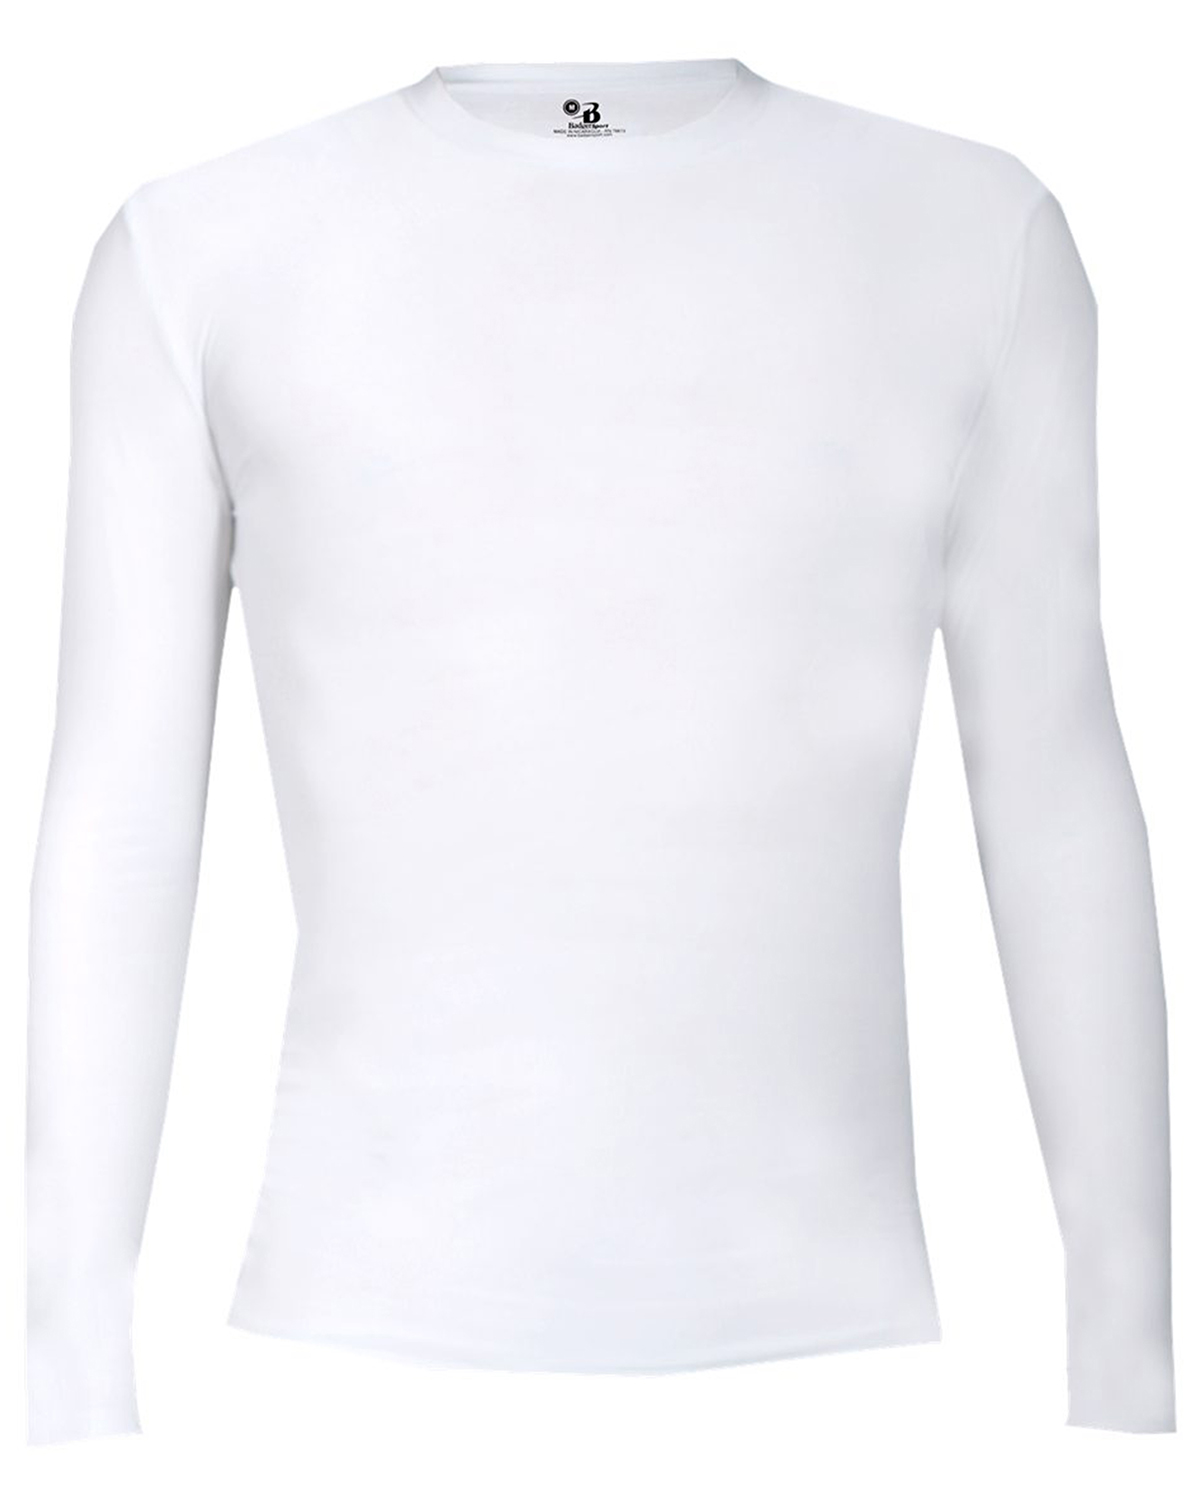 Badger Sport Sport 2605 - Youth Long-Sleeve Compression Tee